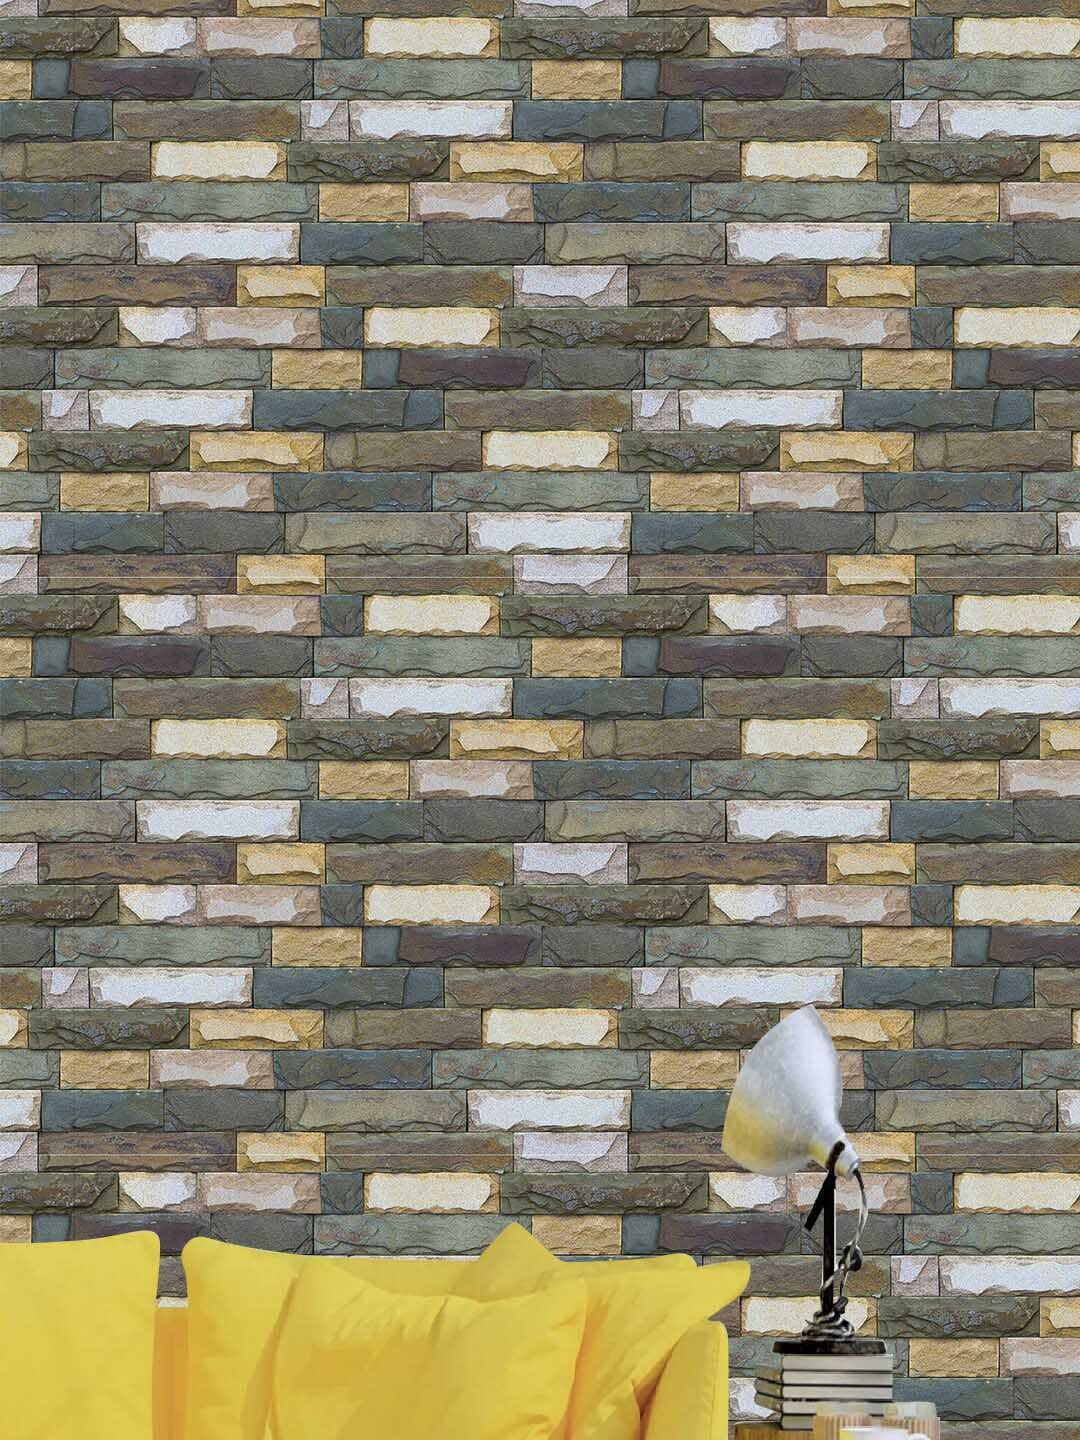 Jaamso Royals Multicoloured Brick Wall Paper Price in India